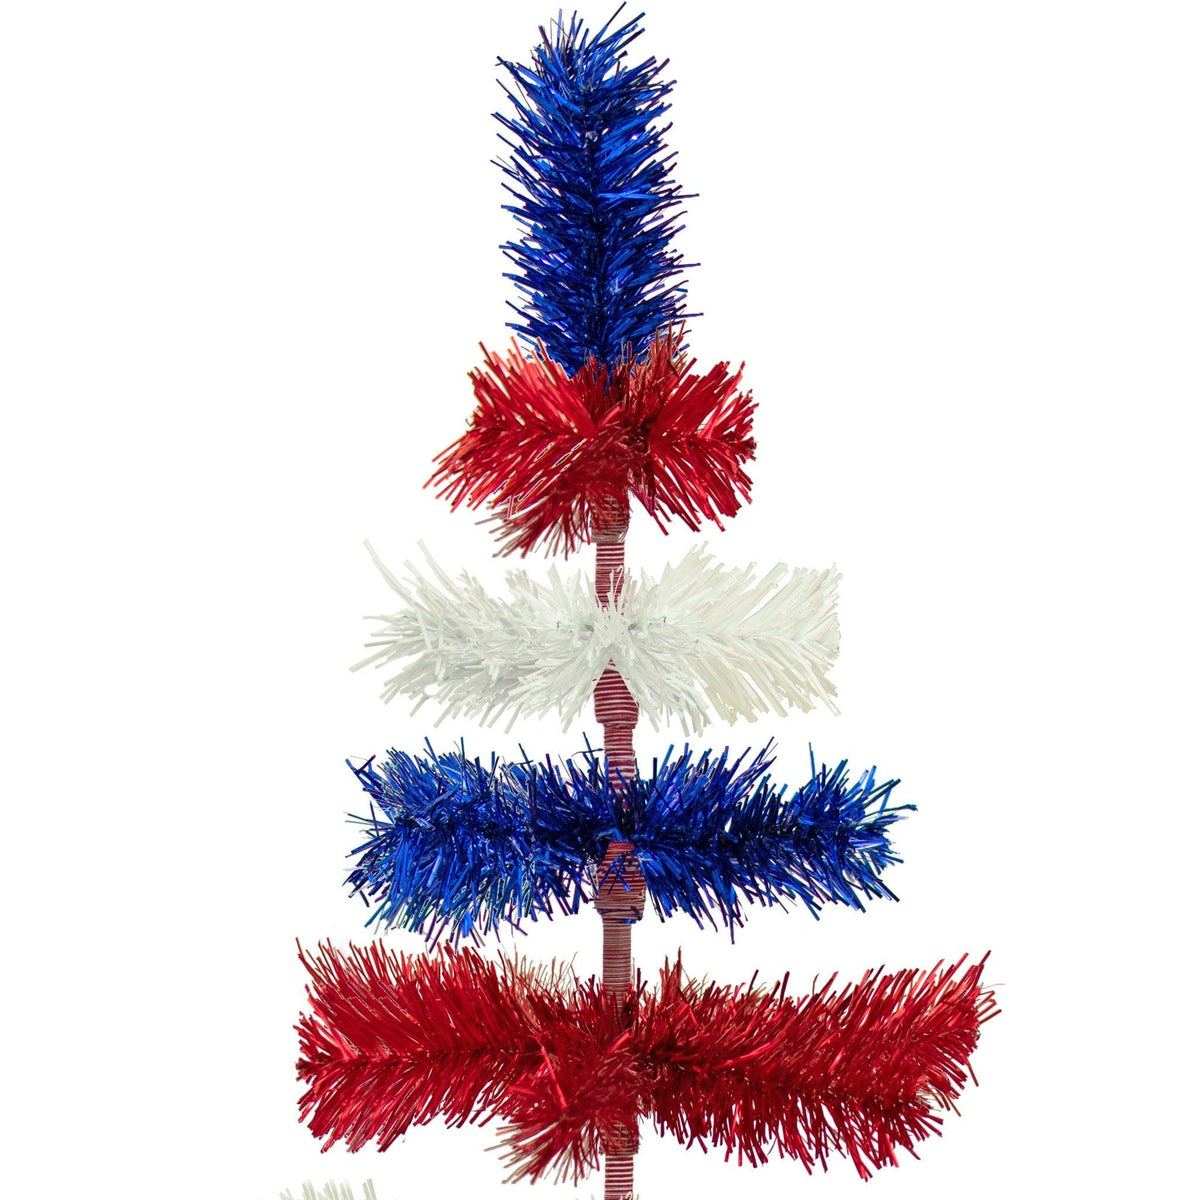 48in tall Red, White, and Blue Layered Tinsel Christmas Trees made by hand in the USA.  Decorate for the holidays with retro 4th of July-themed Trees and start creating your centerpiece now.  Shop for more at leedisplay.com